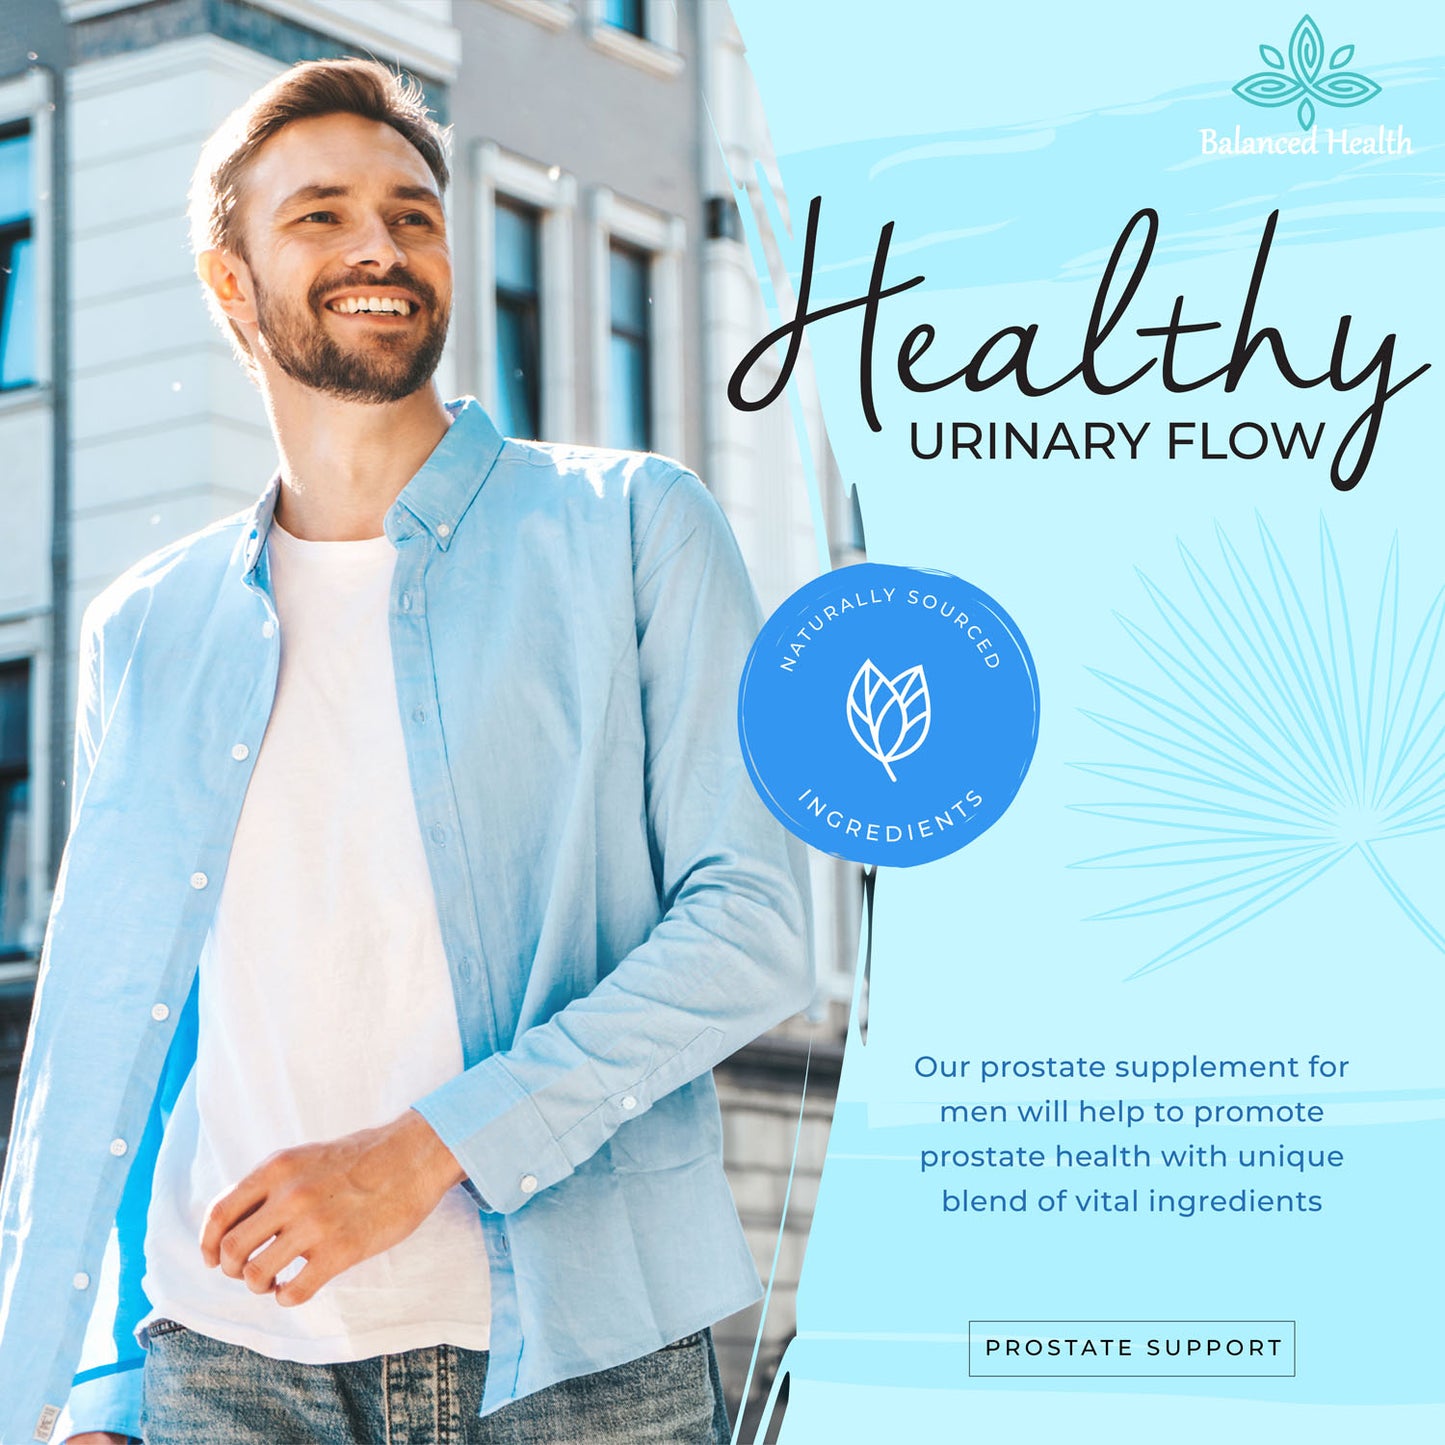 Balanced Health Men's Prostate Support supports healthy urinary flow with unique blend of vital ingredients